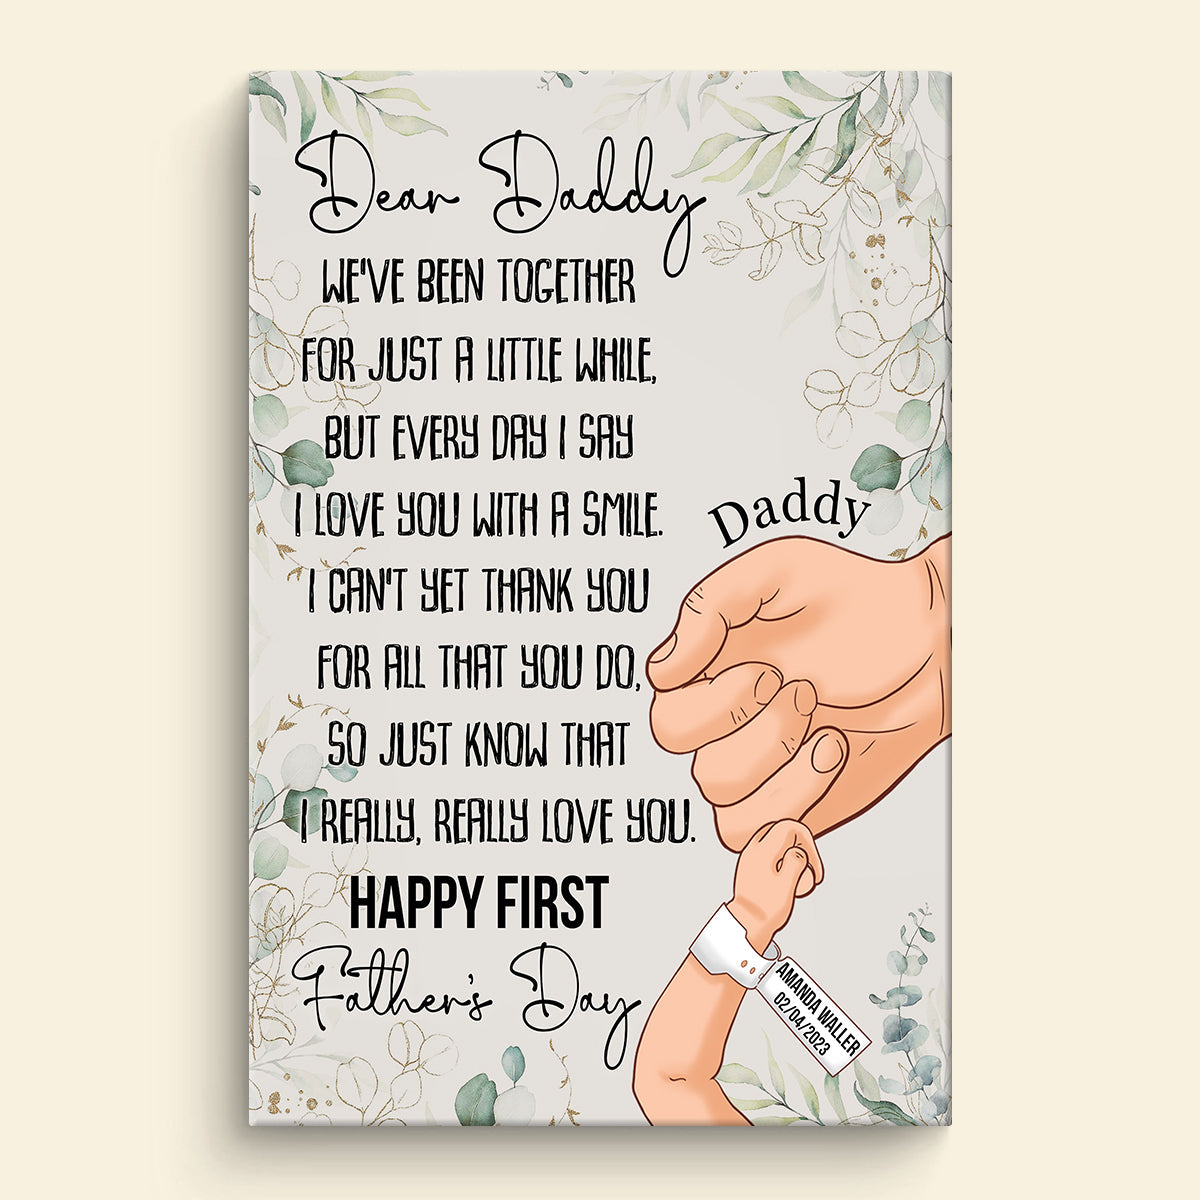 Dear Daddy, I Really Love You - Personalized Canvas - Gift For Father, Daddy, First Father's Day 1_8cdeb812-f3ca-4101-a9a6-6447282c1427.jpg?v=1682399078